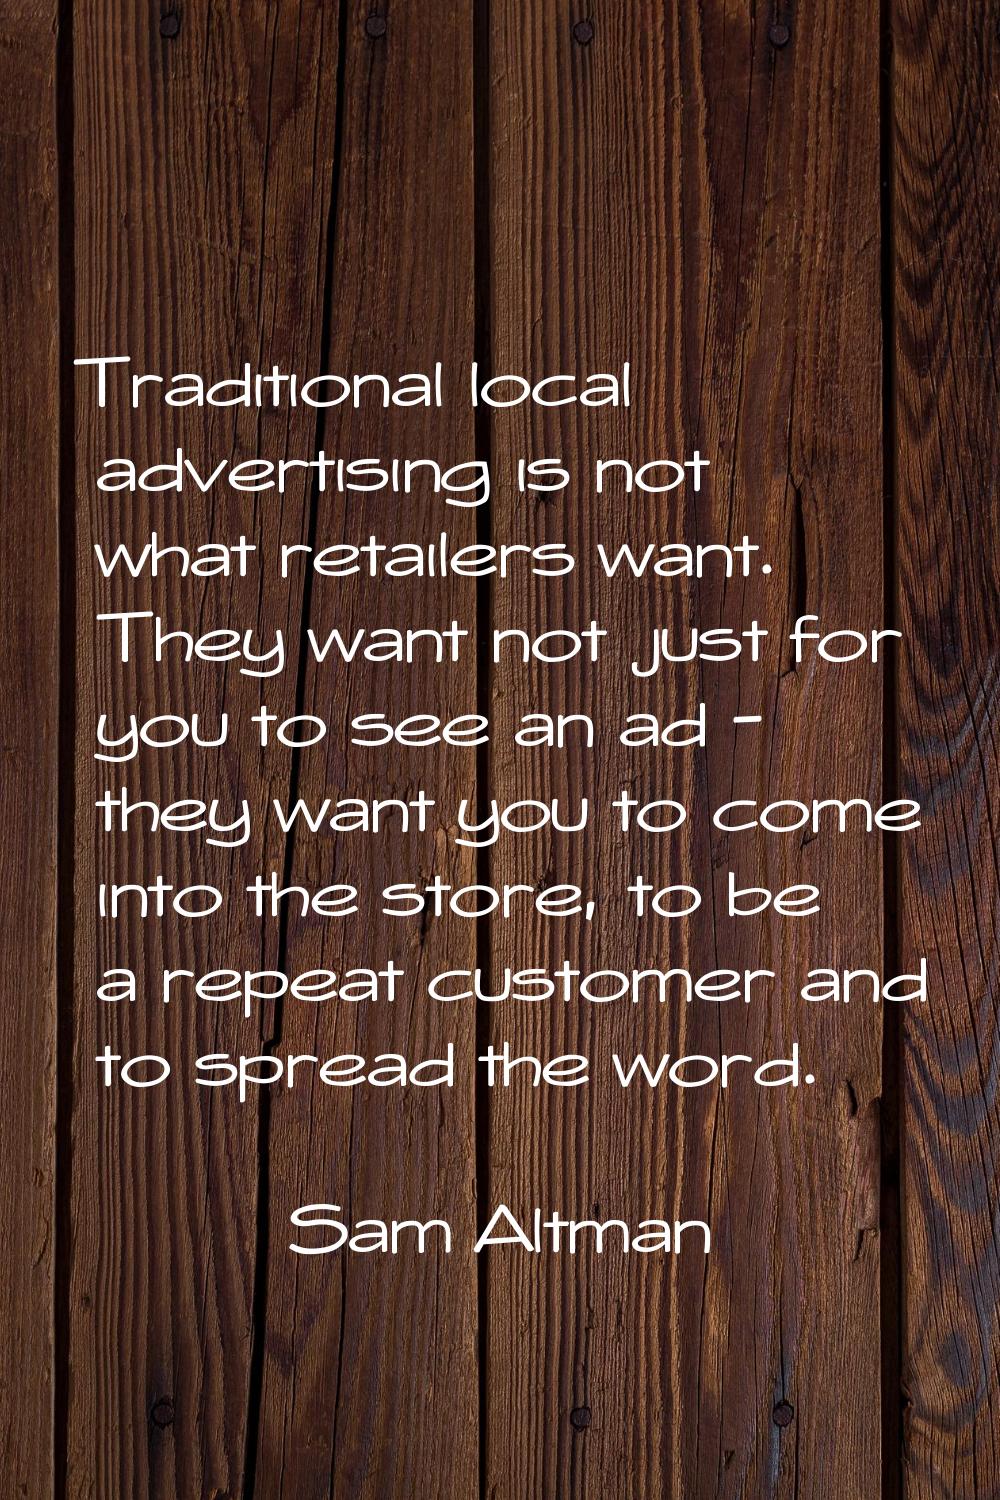 Traditional local advertising is not what retailers want. They want not just for you to see an ad -